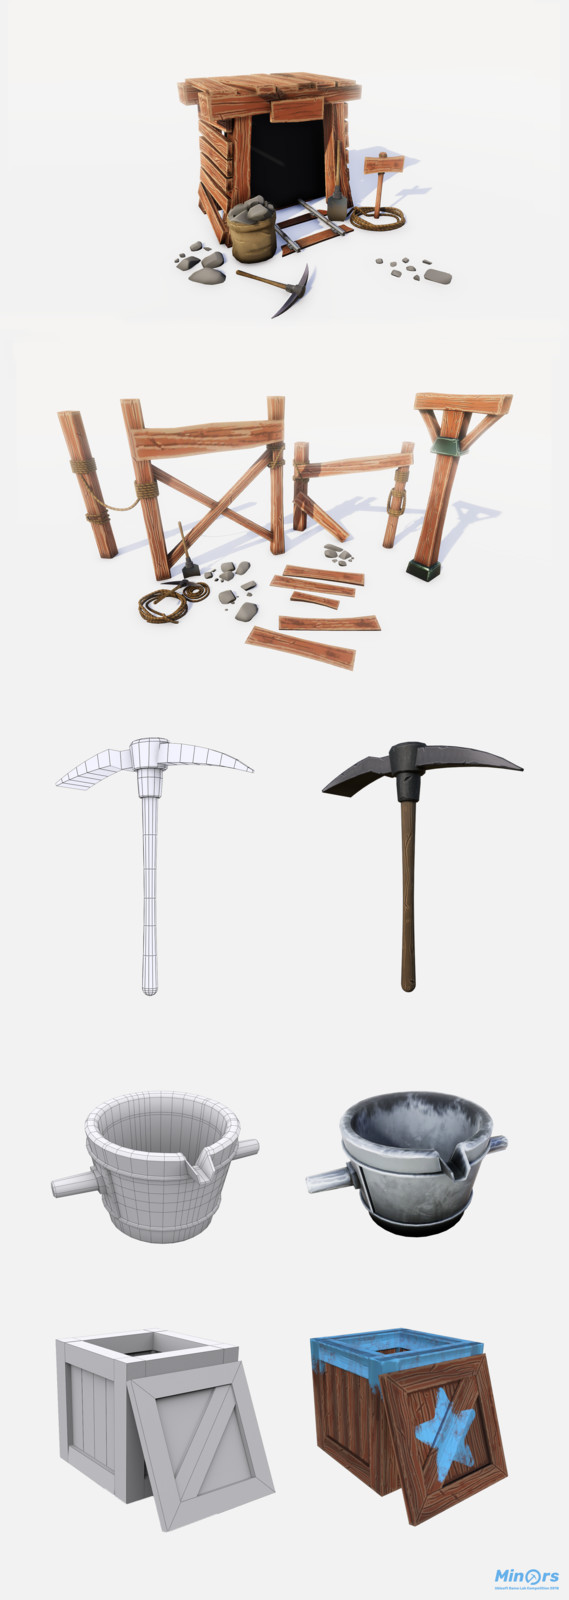 In-Game Props